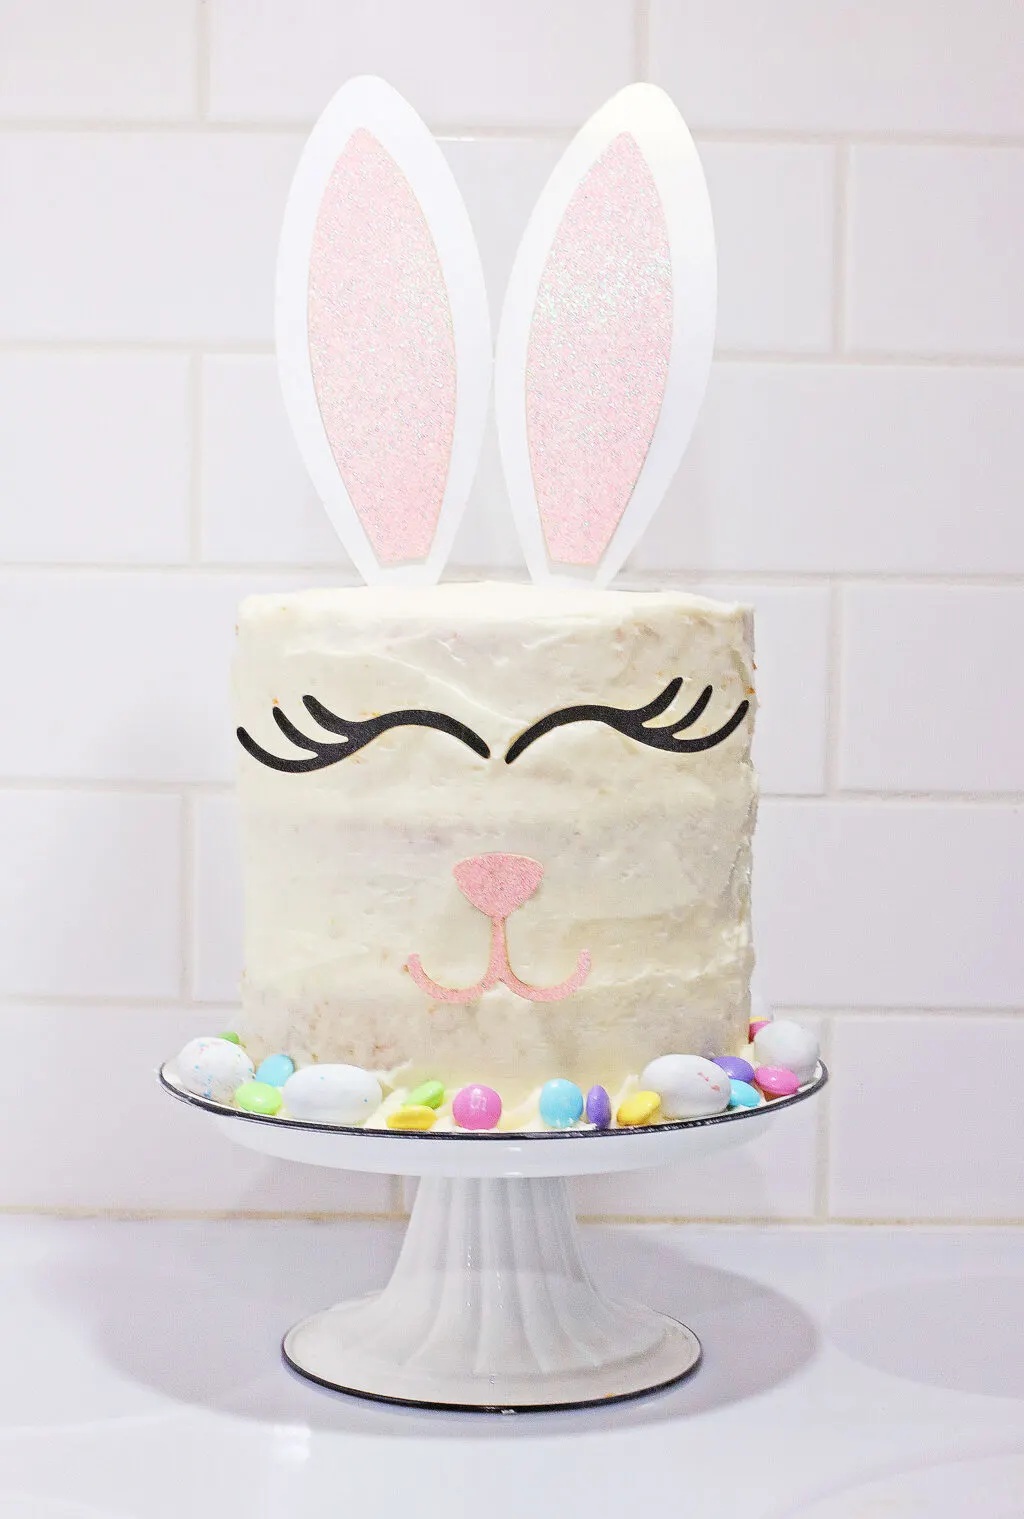 added bunny face stencils to bunny cake